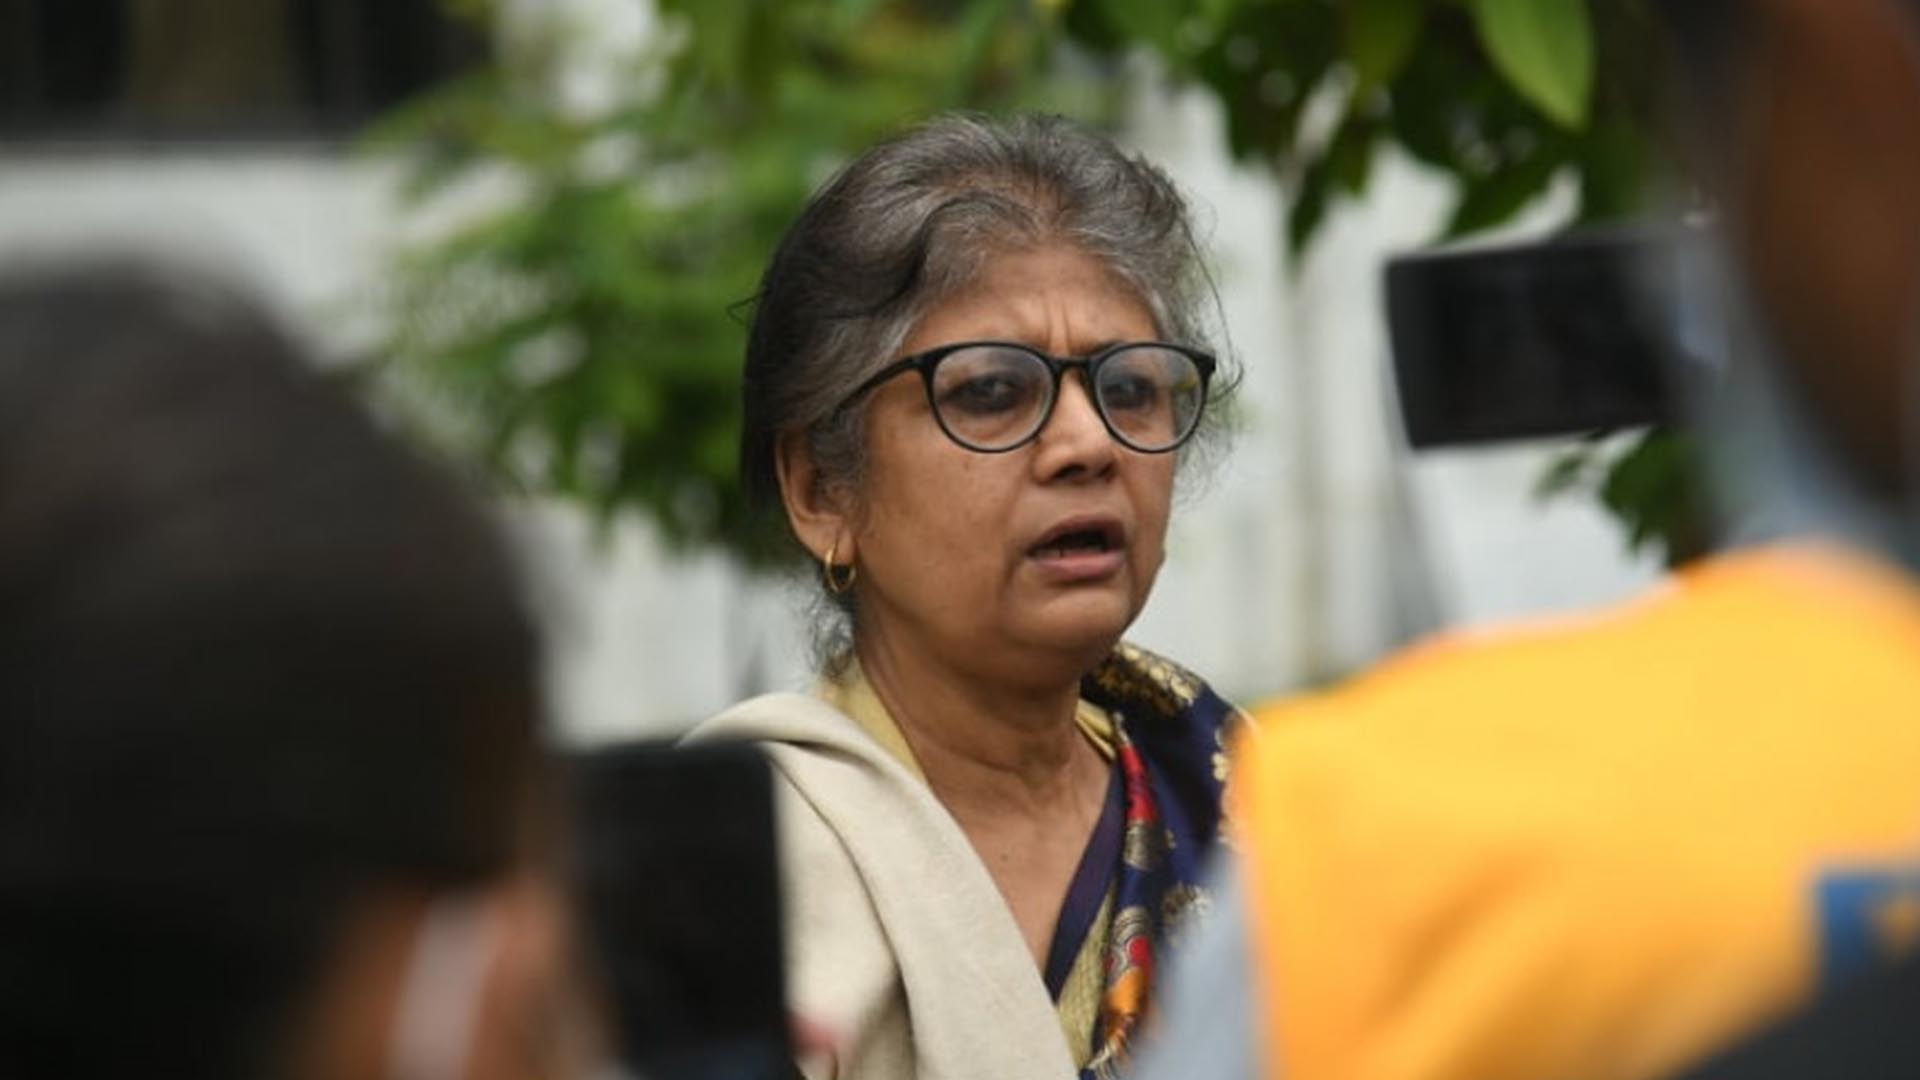 Sarita Giri formally resigned from the post of Member of Parliament